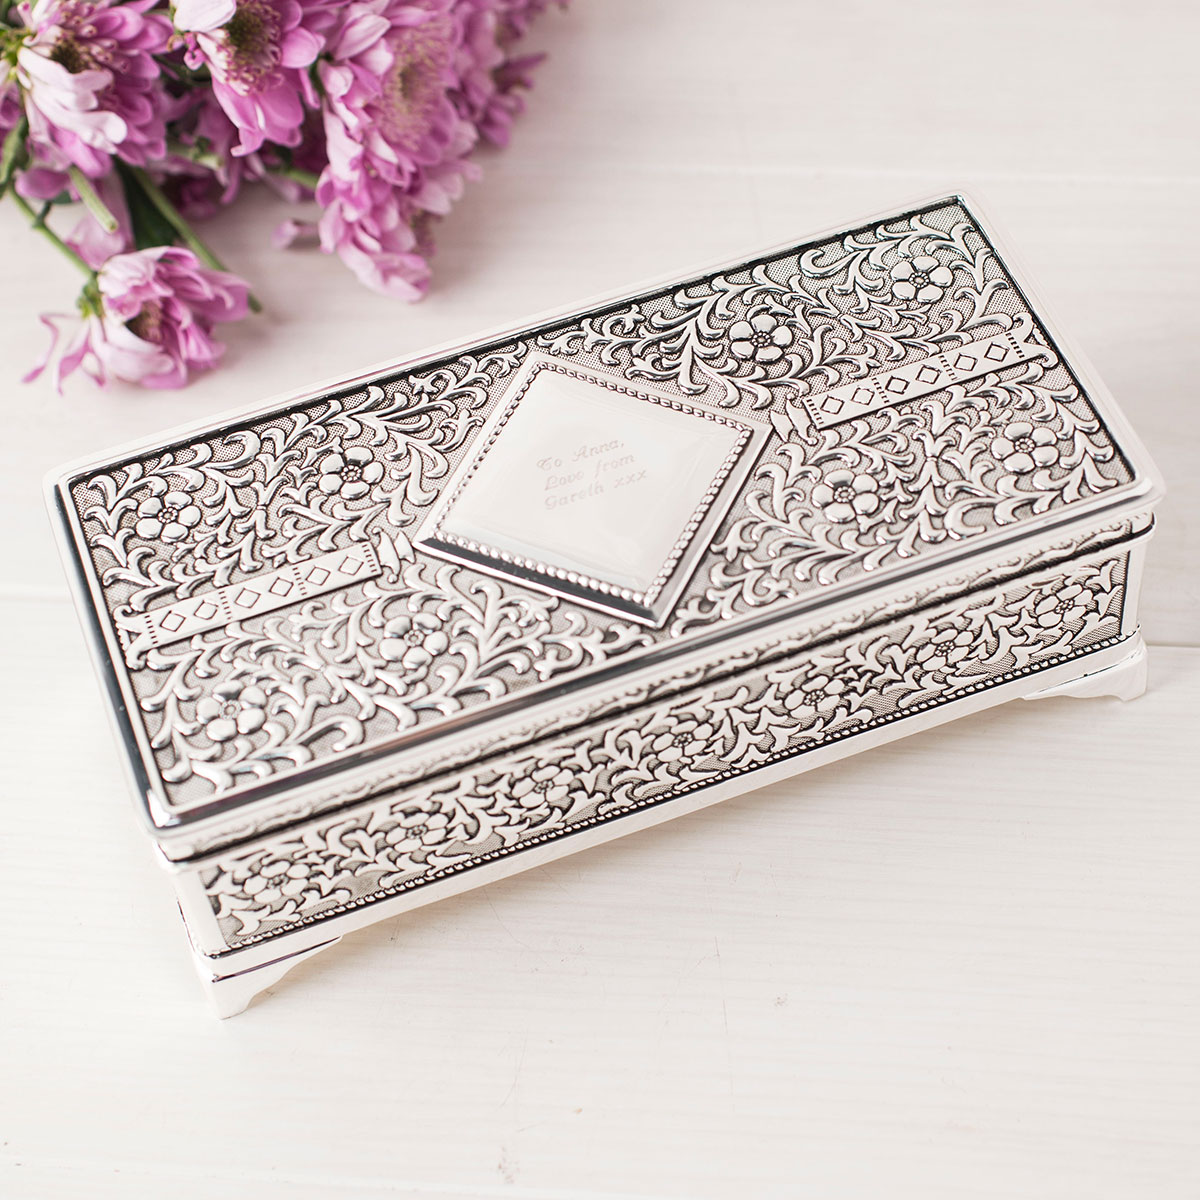 Antique Finish Silver-Plated Jewellery Box